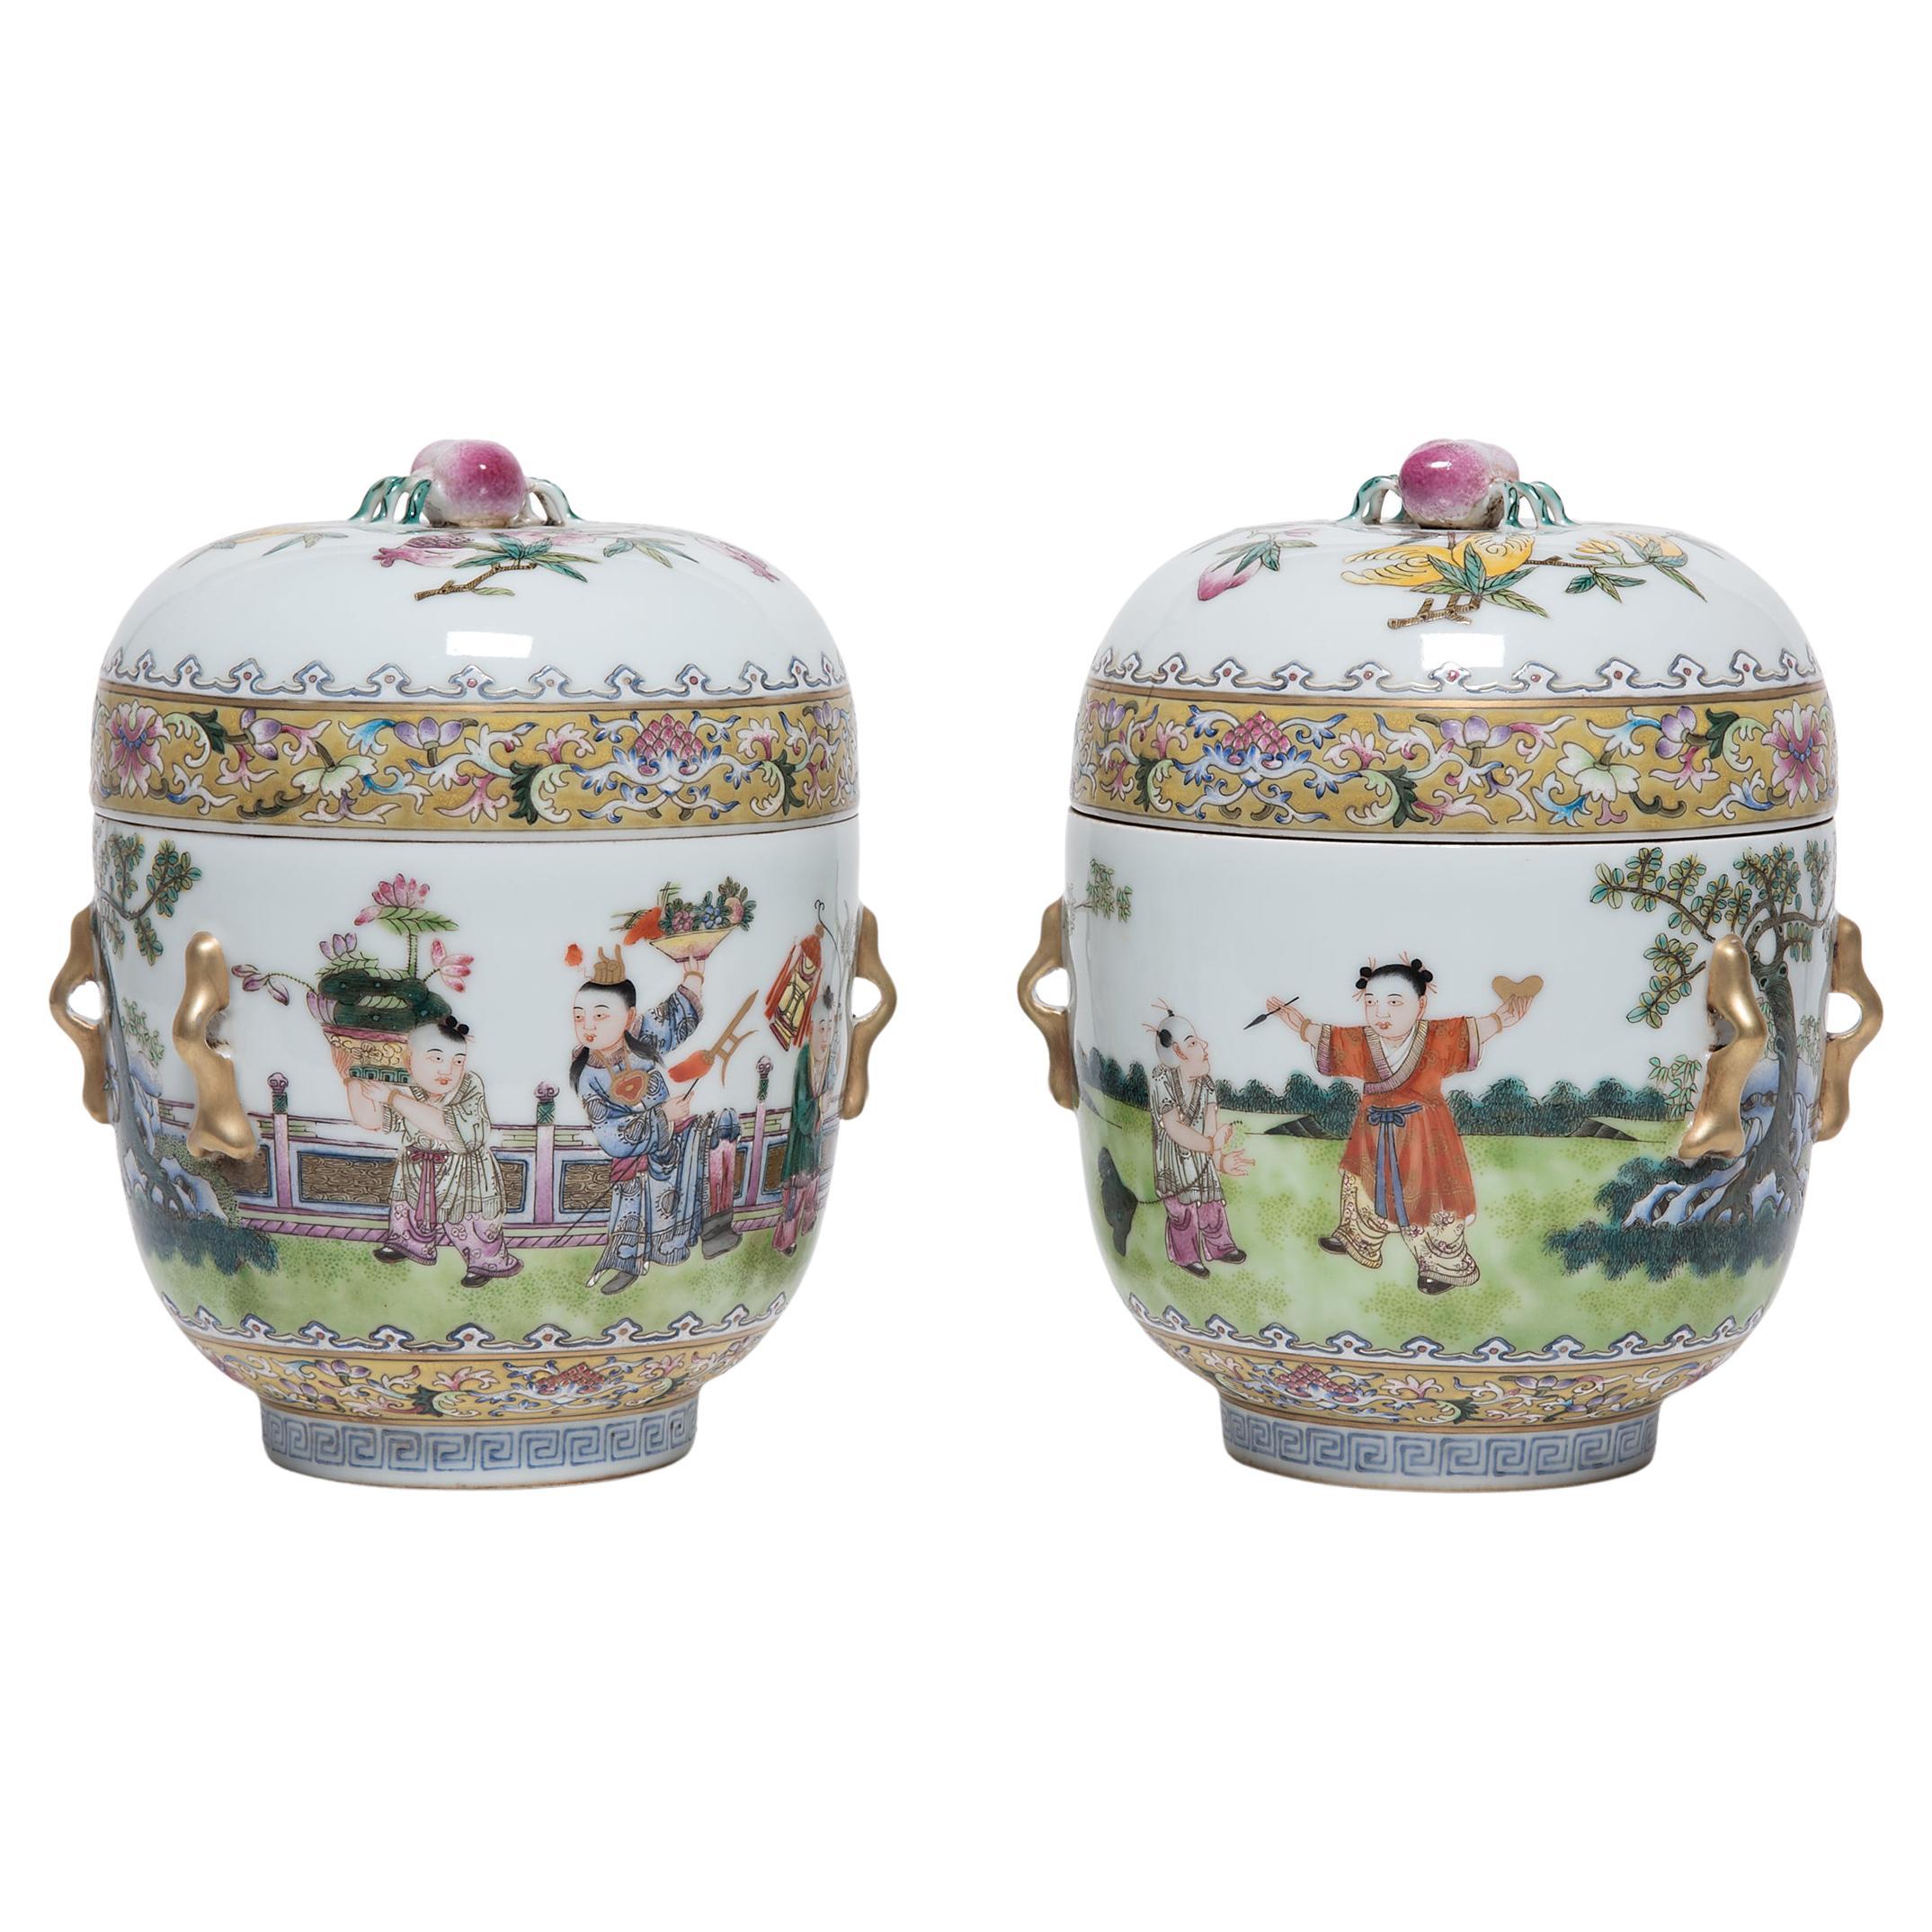 Pair of Chinese Famille Rose Jars with Boys at Play, c. 1900